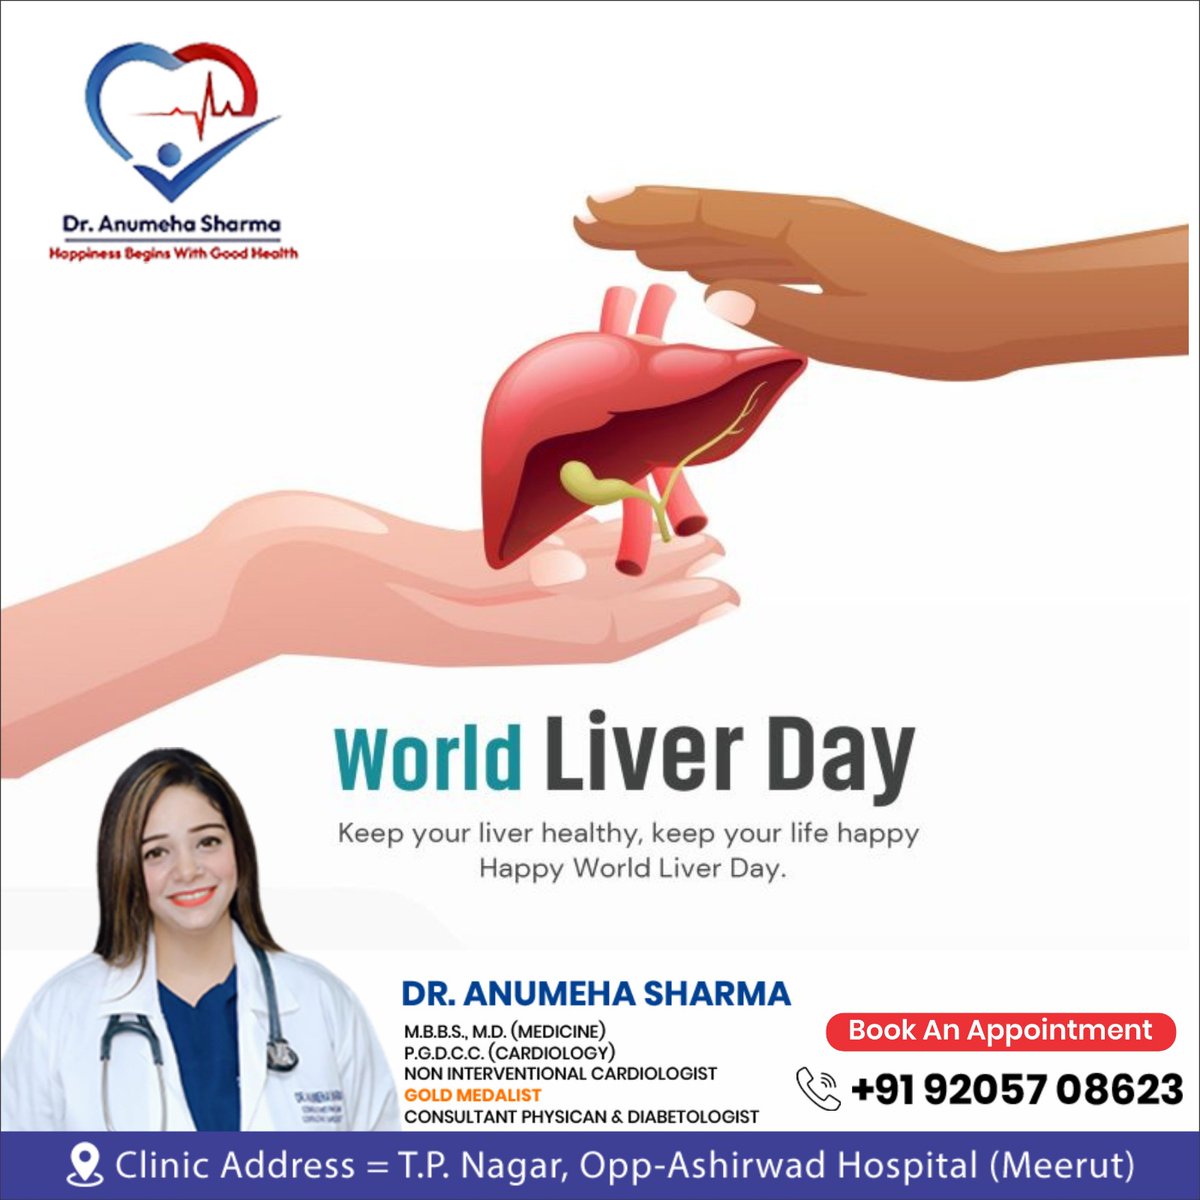 𝐖𝐨𝐫𝐥𝐝 𝐋𝐢𝐯𝐞𝐫 𝐃𝐚𝐲
Keep your liver healthy, keep your life happy Happy World Liver Day.🌟🍏
.
.
#LiverAwareness #Detox #Wellness #HealthyChoices #BodyAppreciation #SelfCare
#NourishYourBody #Cleanse #StayHealthy #BodyHarmony